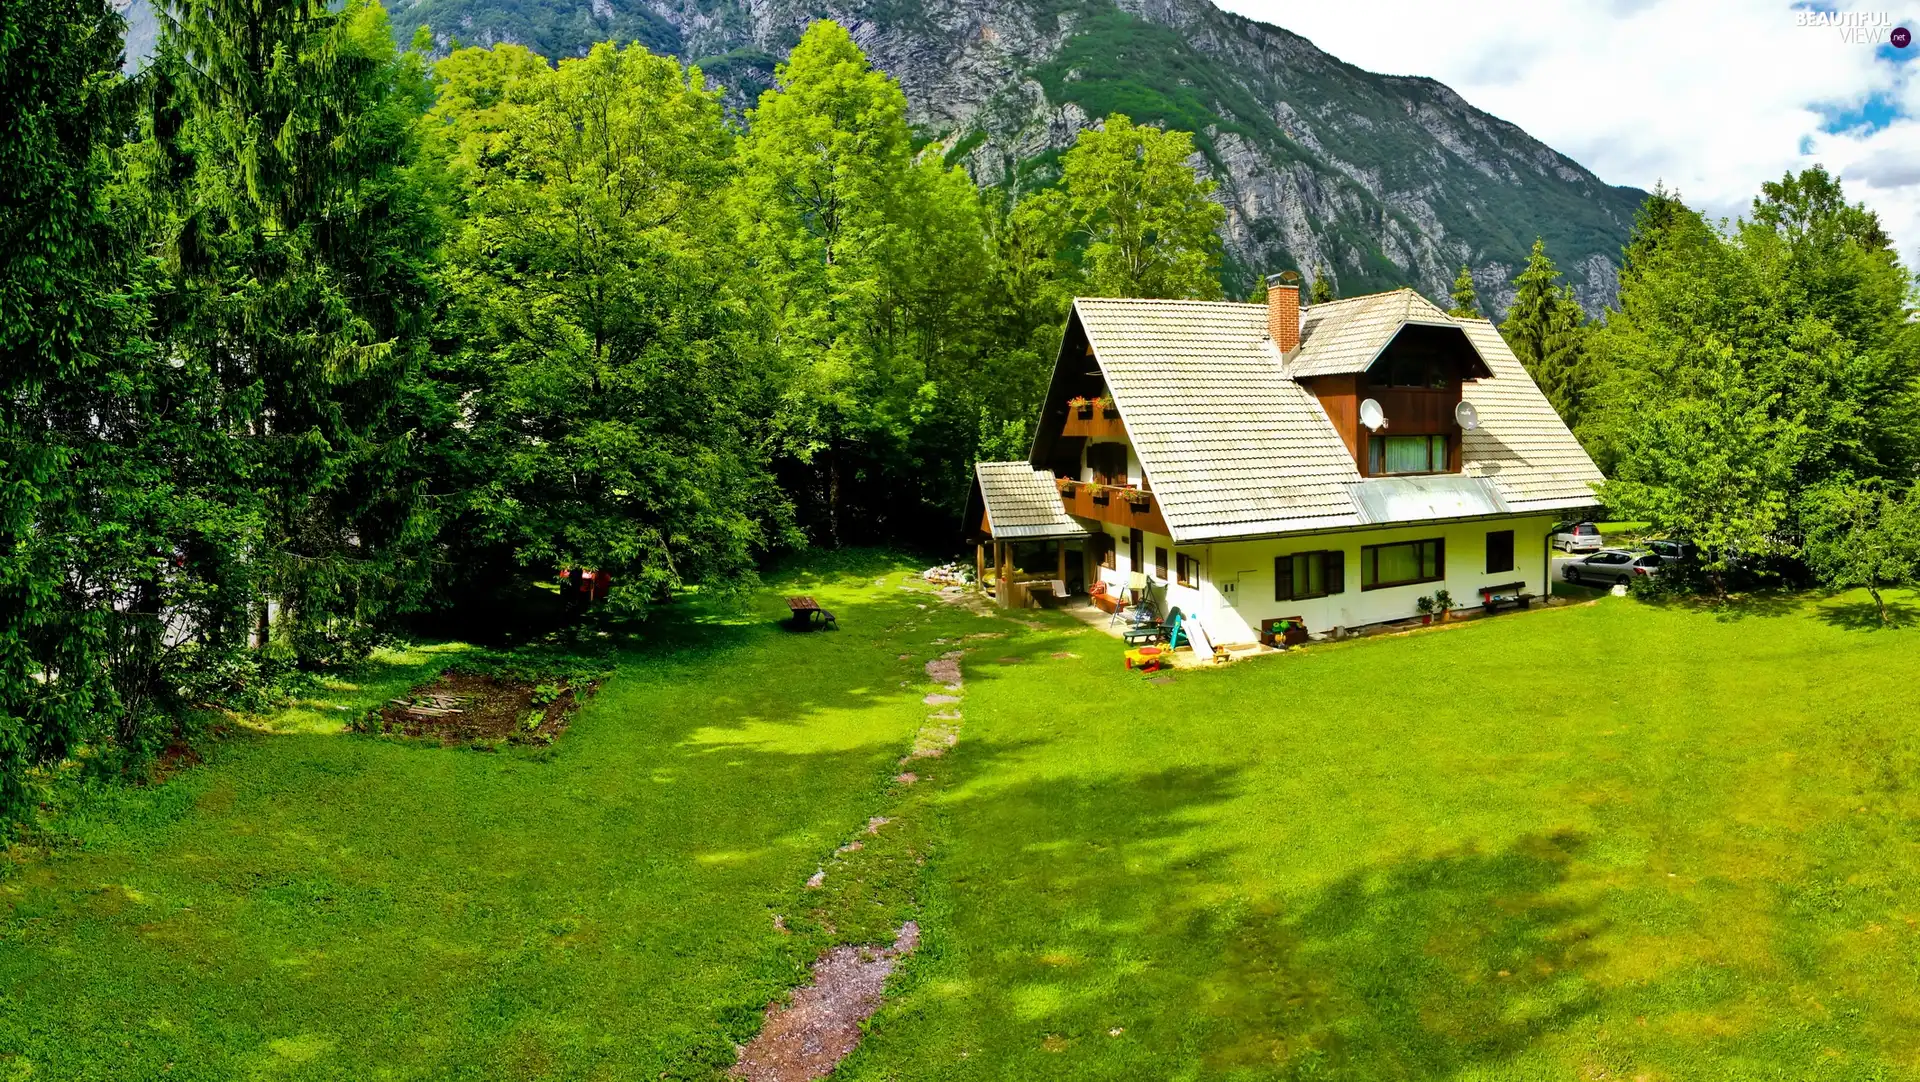 viewes, green, house, trees, Mountains